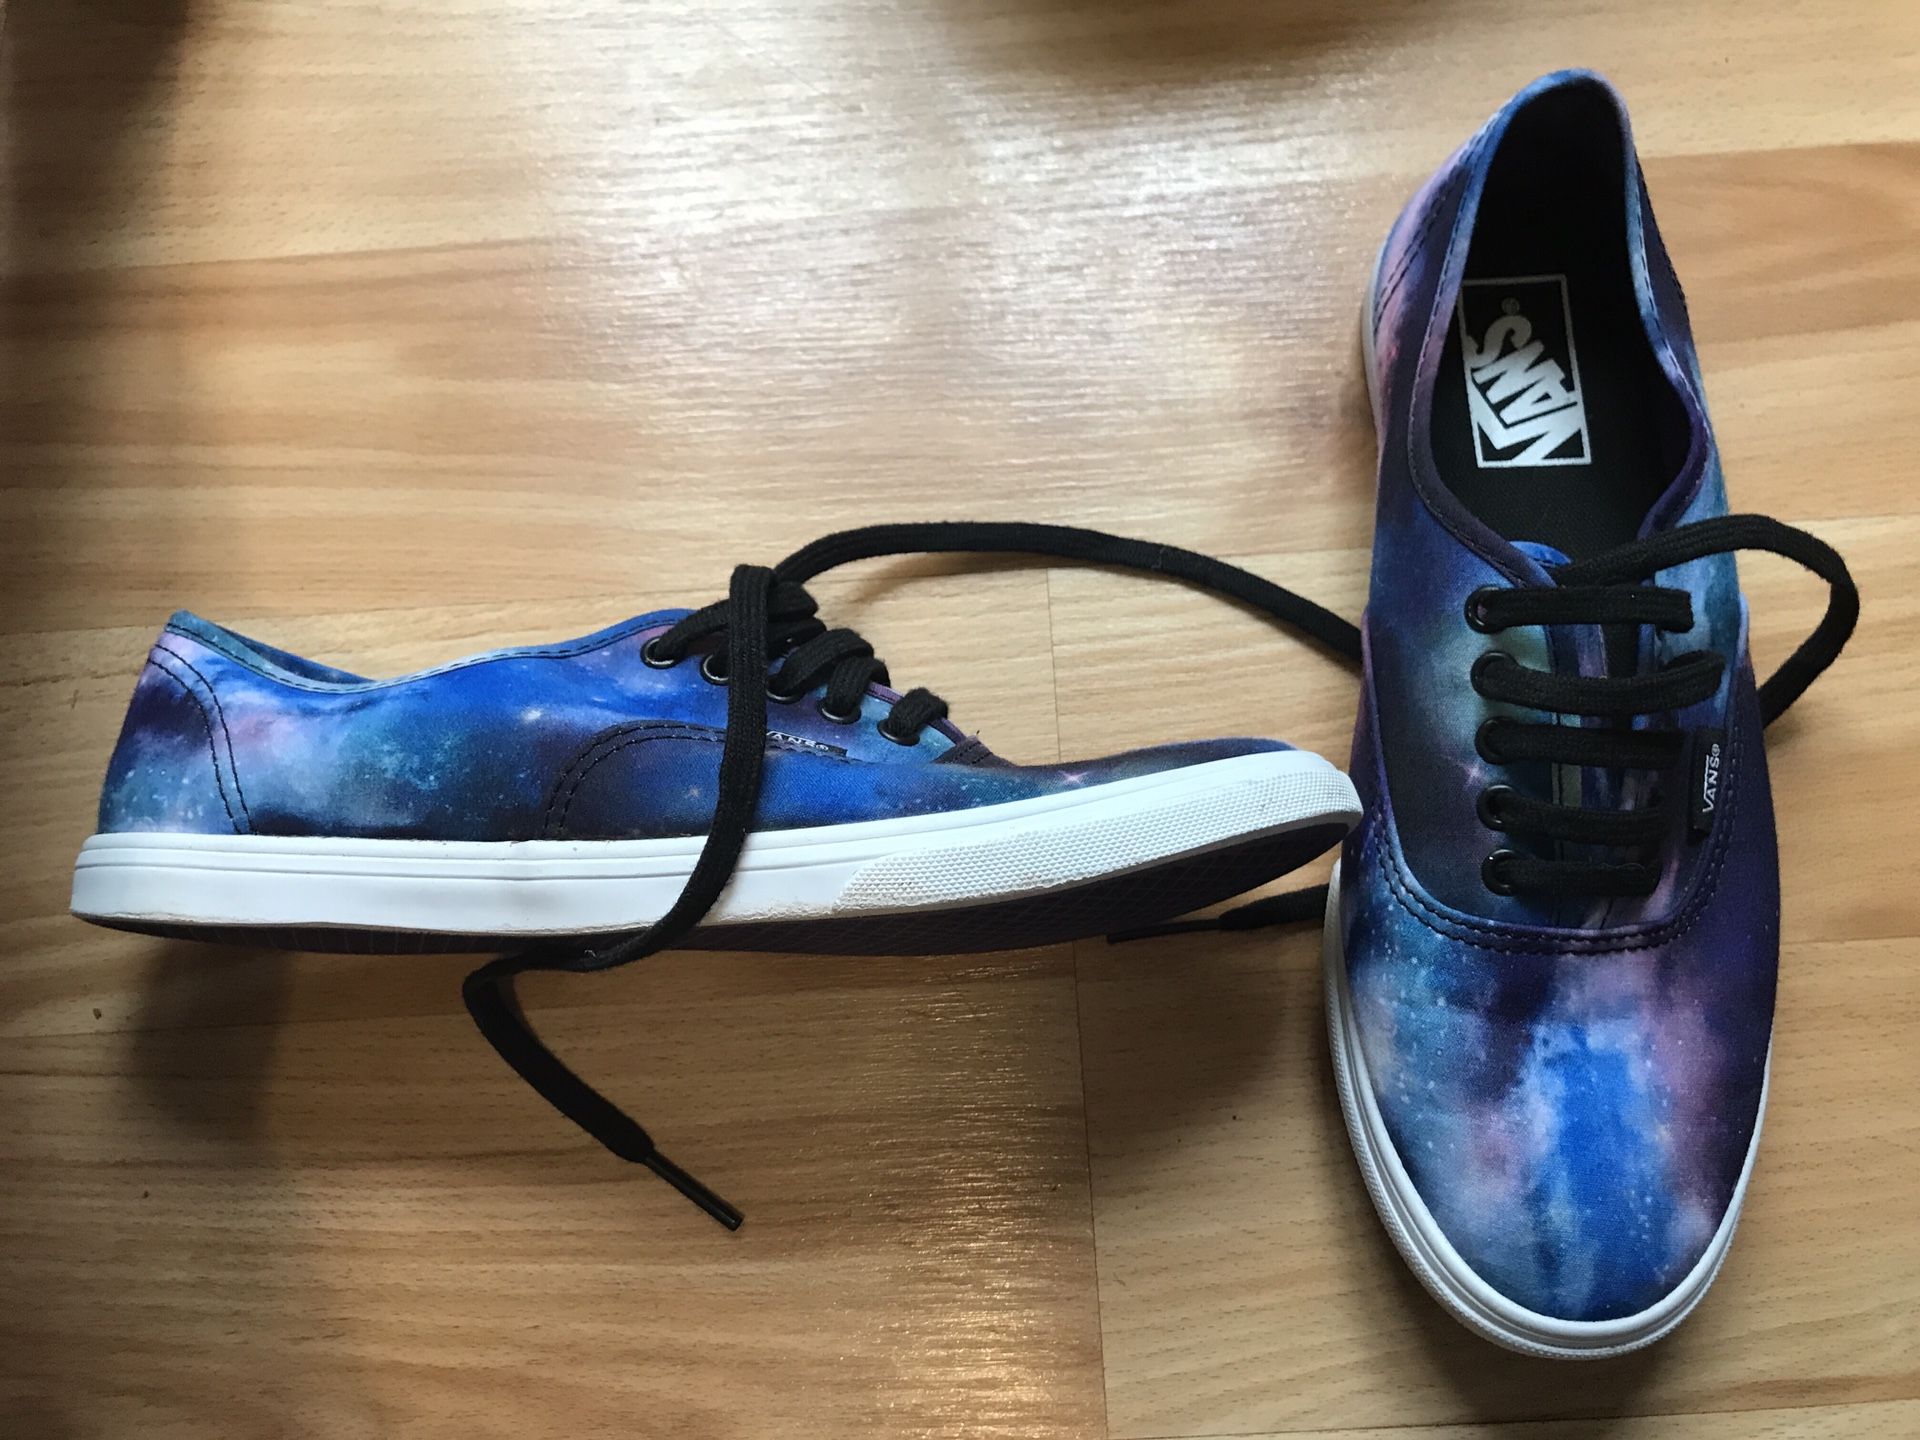 Vans Cosmic Galaxy Authentic Lo Pro Sneakers - These are sold out on their website - Men’s size 6.5 and women’s size 8 - Great condition with light w